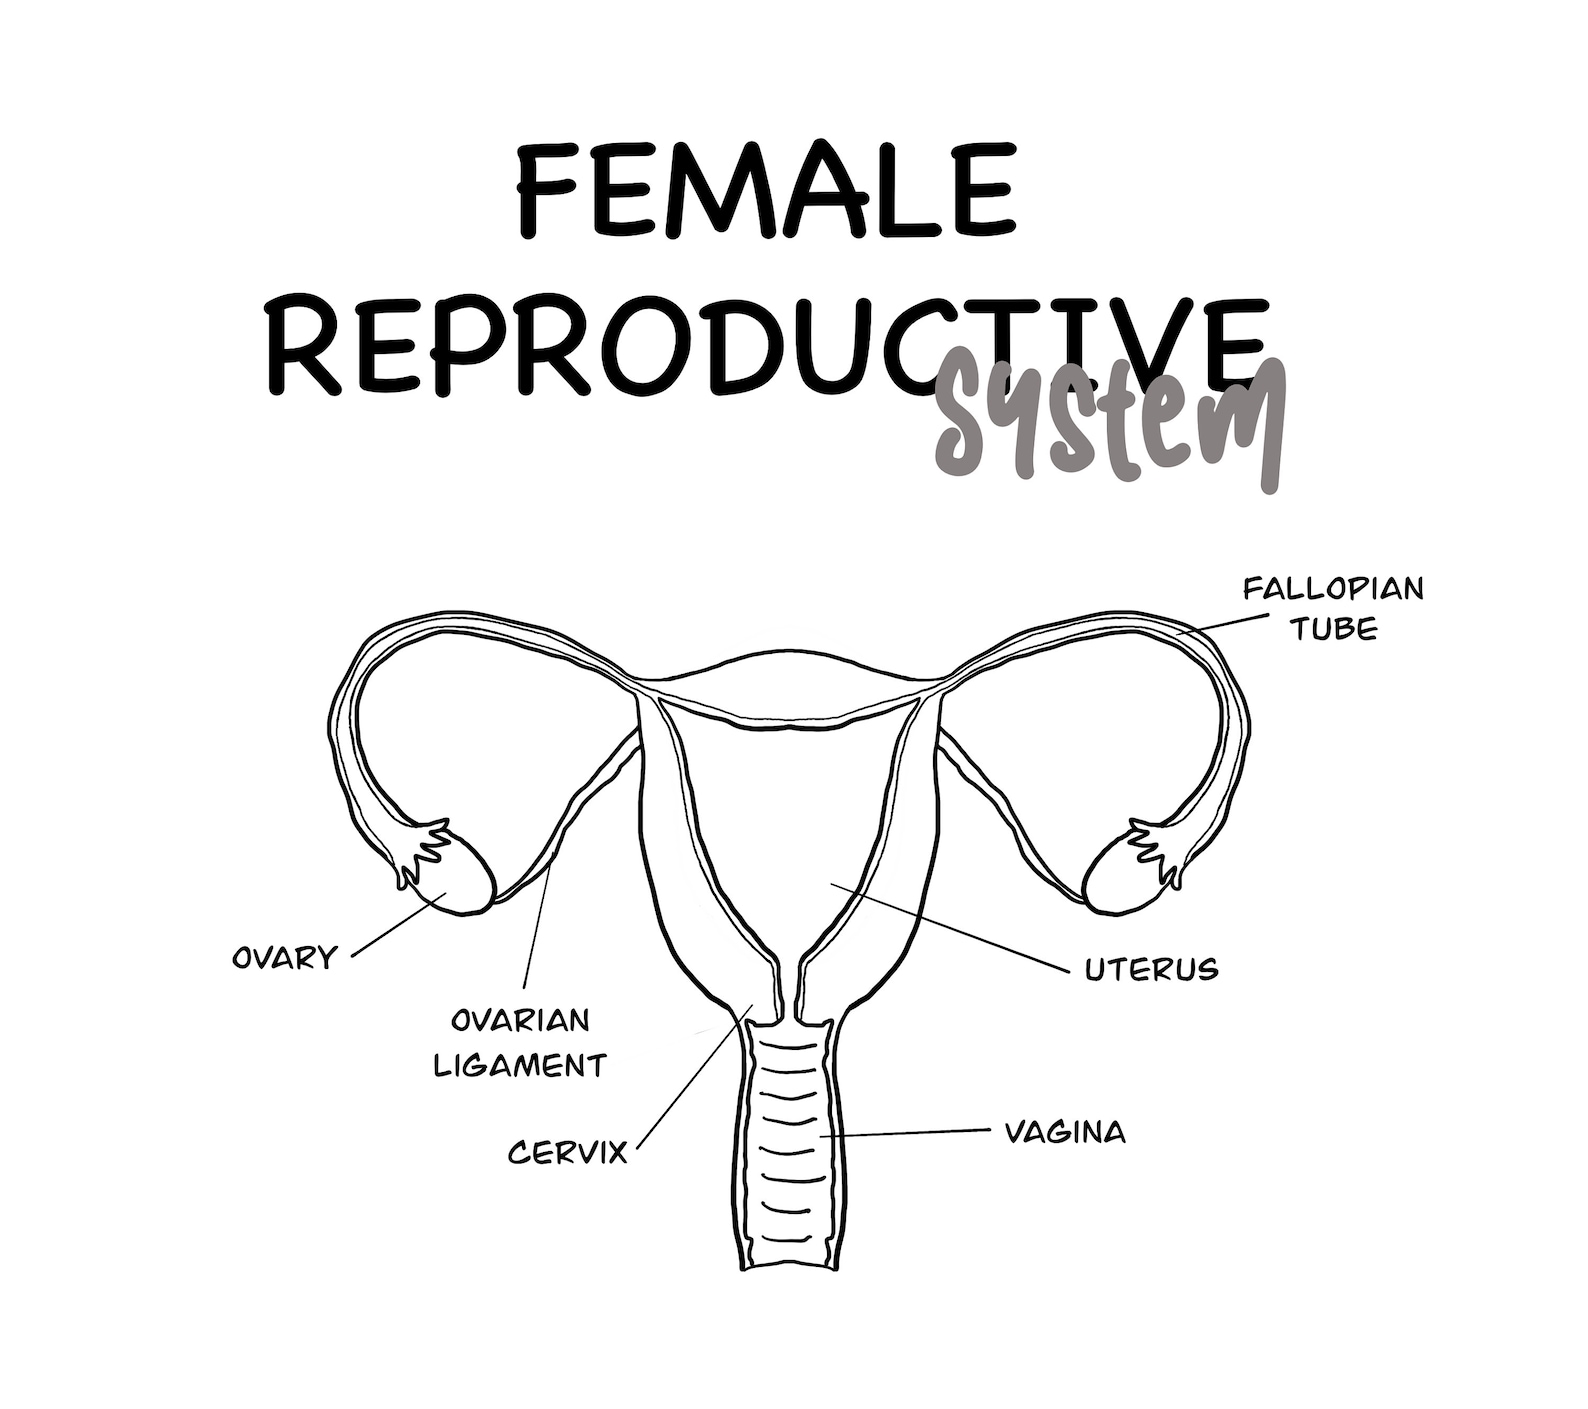 Diagrams Of The Female Reproductive System Diagrams Images And